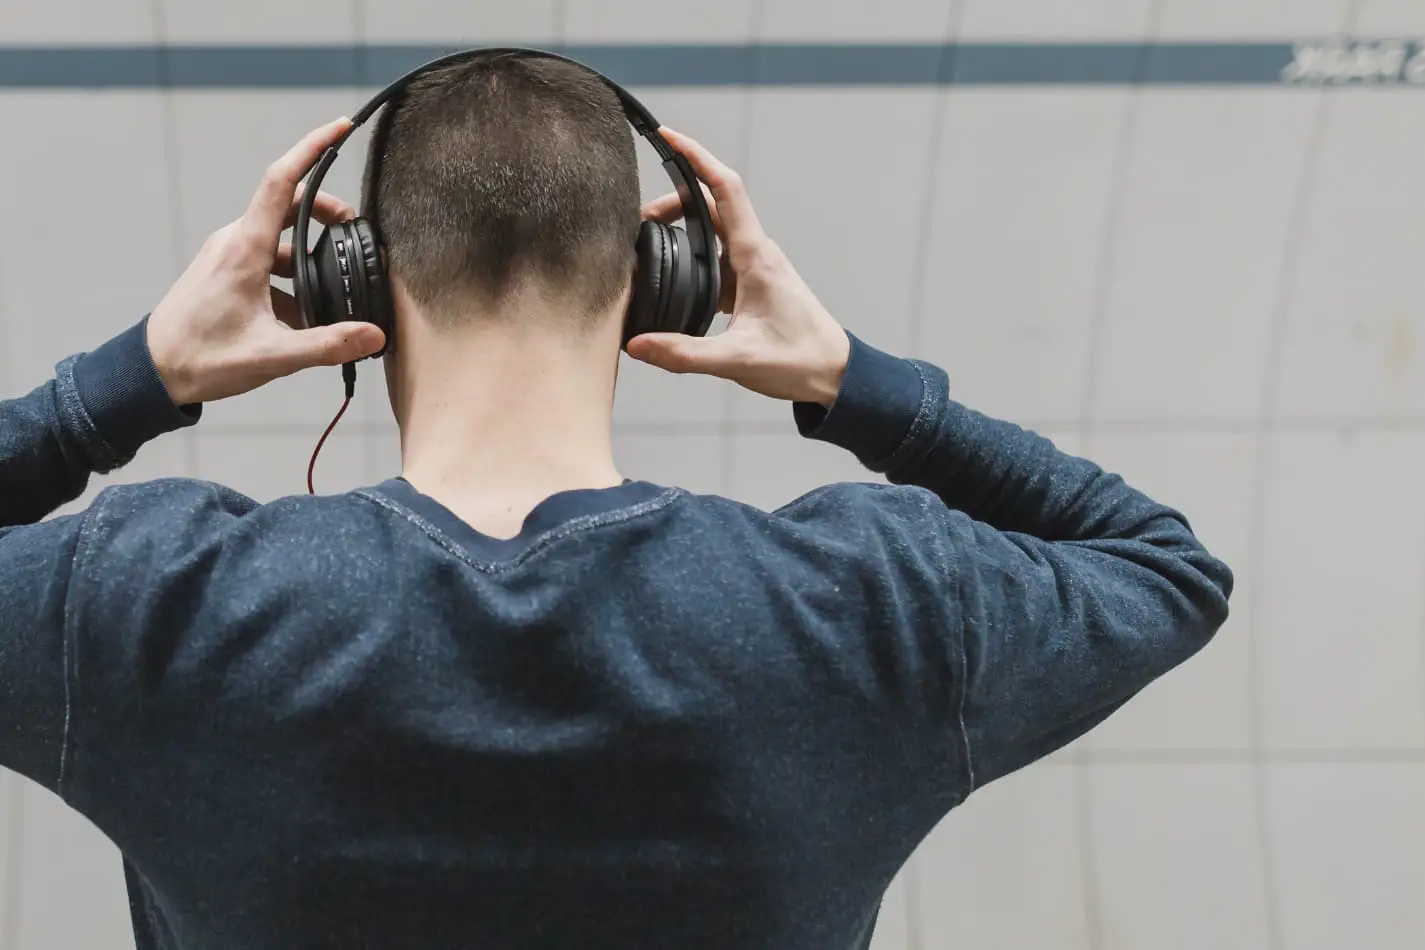 Turn Down the Volume: Talking Quieter with Headphones On